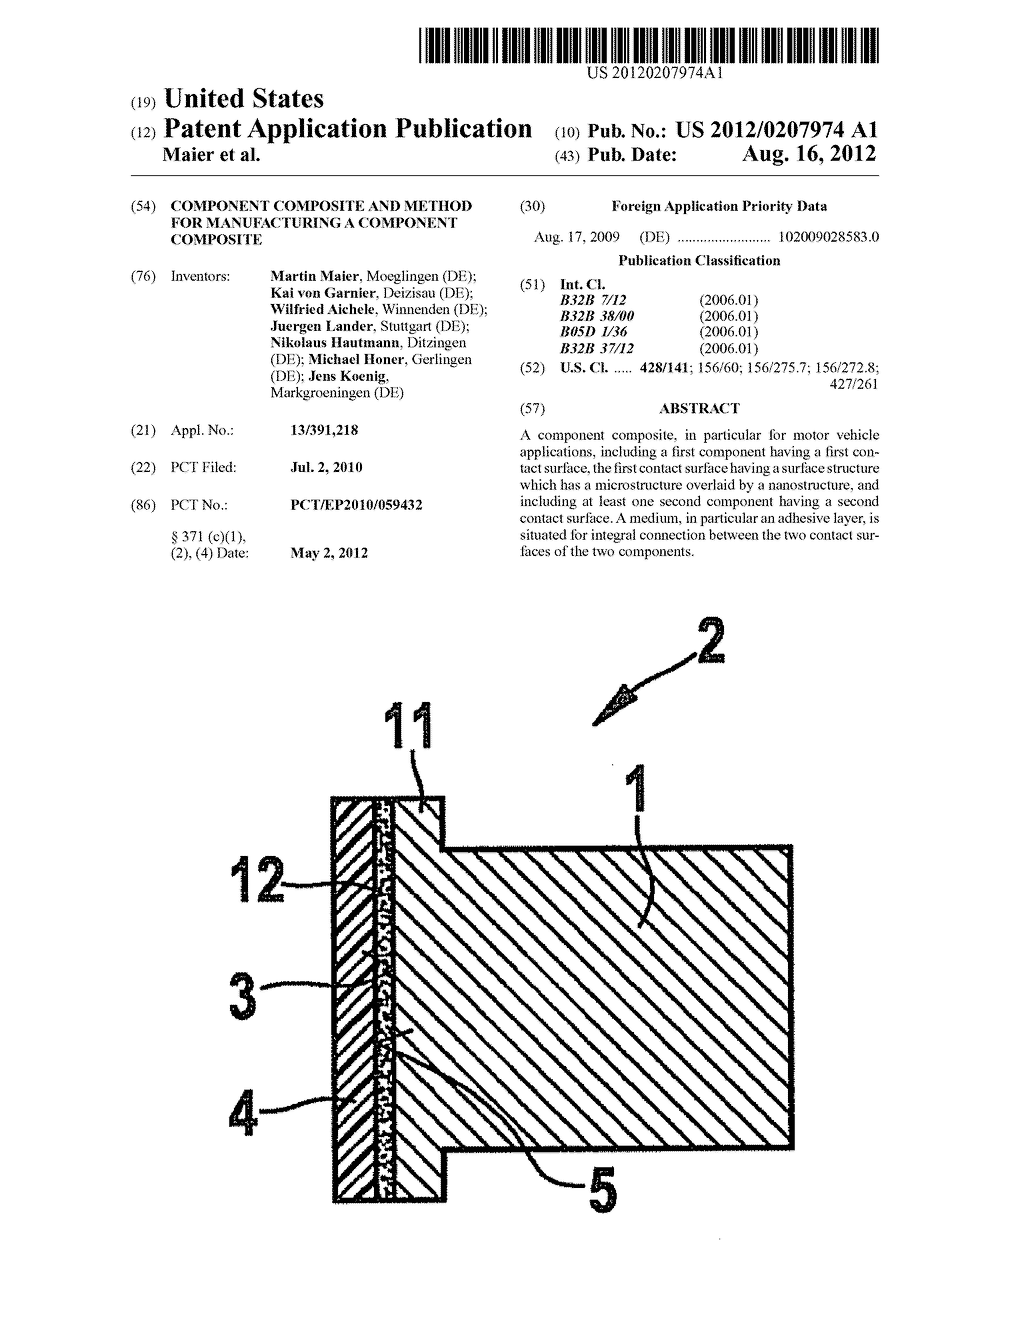 COMPONENT COMPOSITE AND METHOD FOR MANUFACTURING A COMPONENT COMPOSITE - diagram, schematic, and image 01